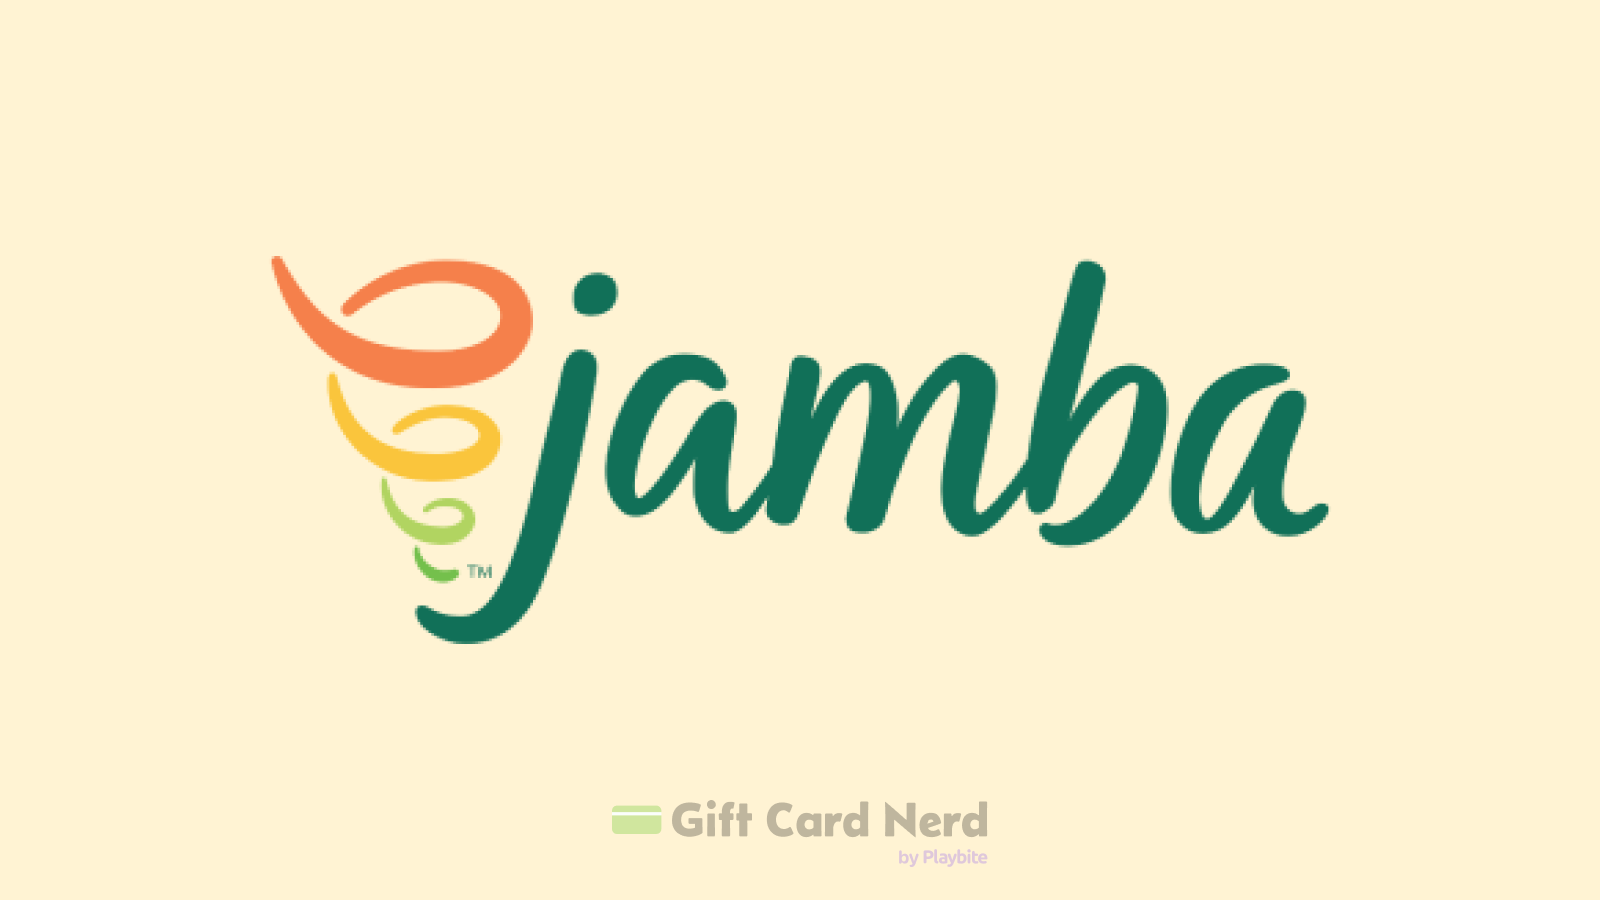 Can I use a Jamba Juice gift card on Postmates?